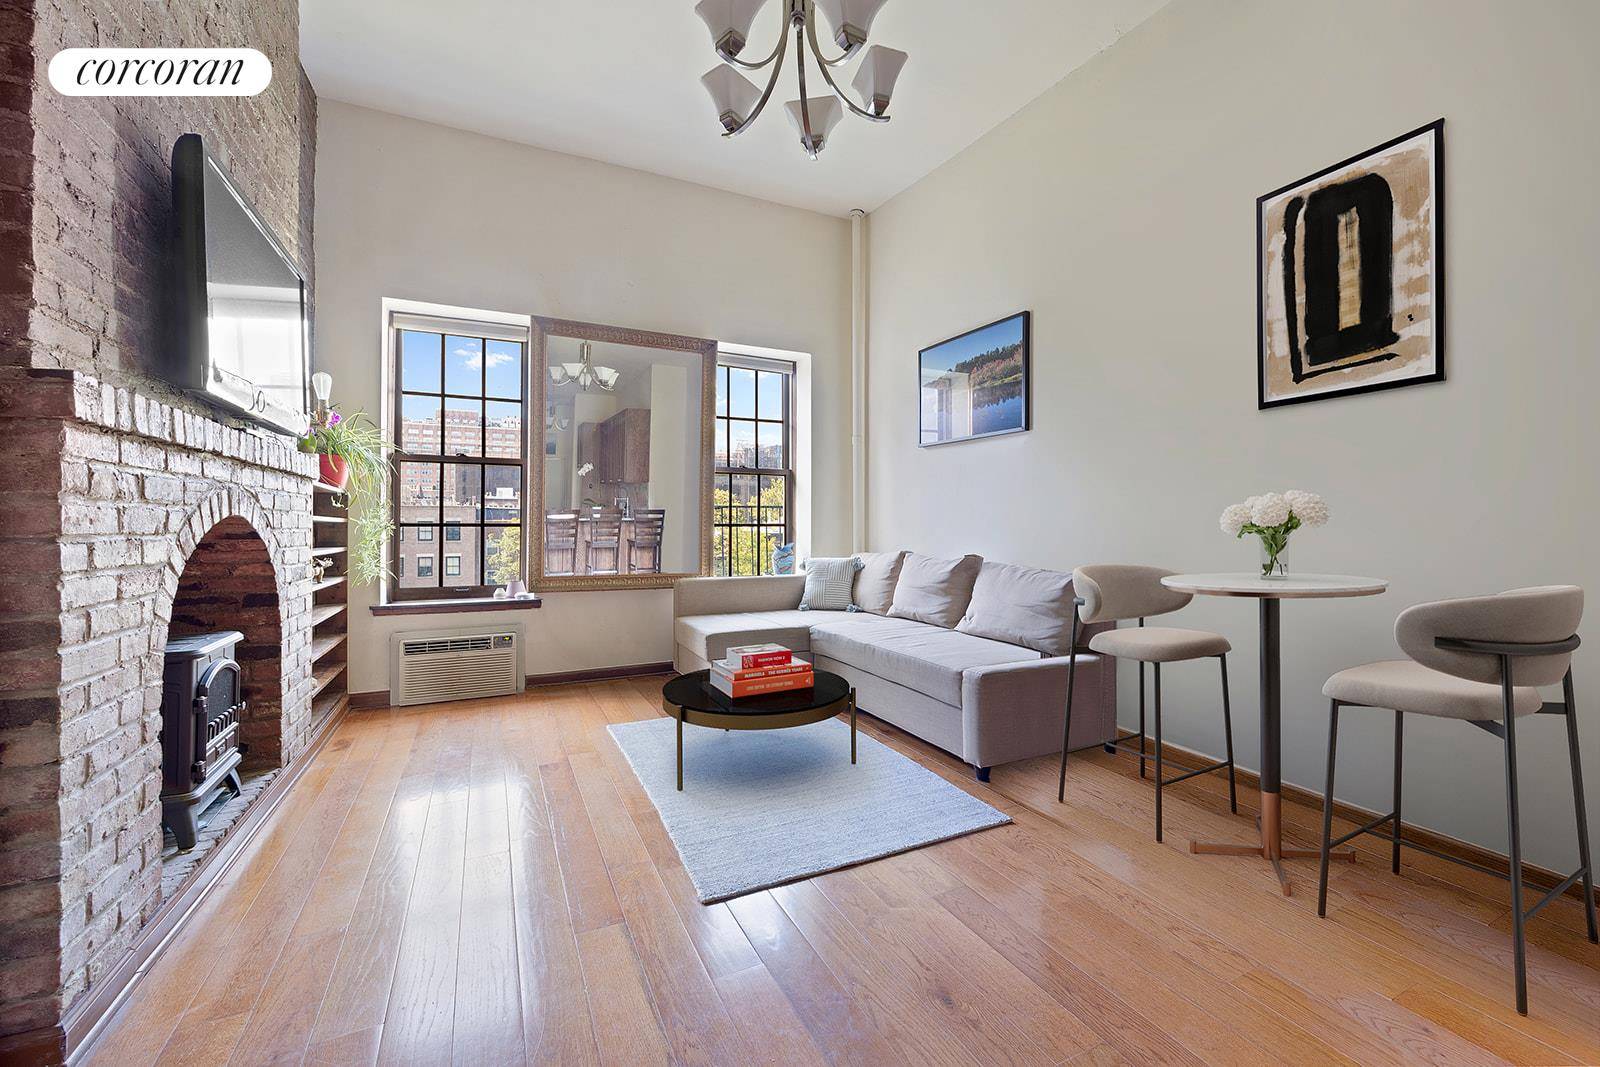 Prime Chelsea location ! In a charming pre war building, this renovated home offers gorgeous south facing unobstructed views of a park directly across the street.